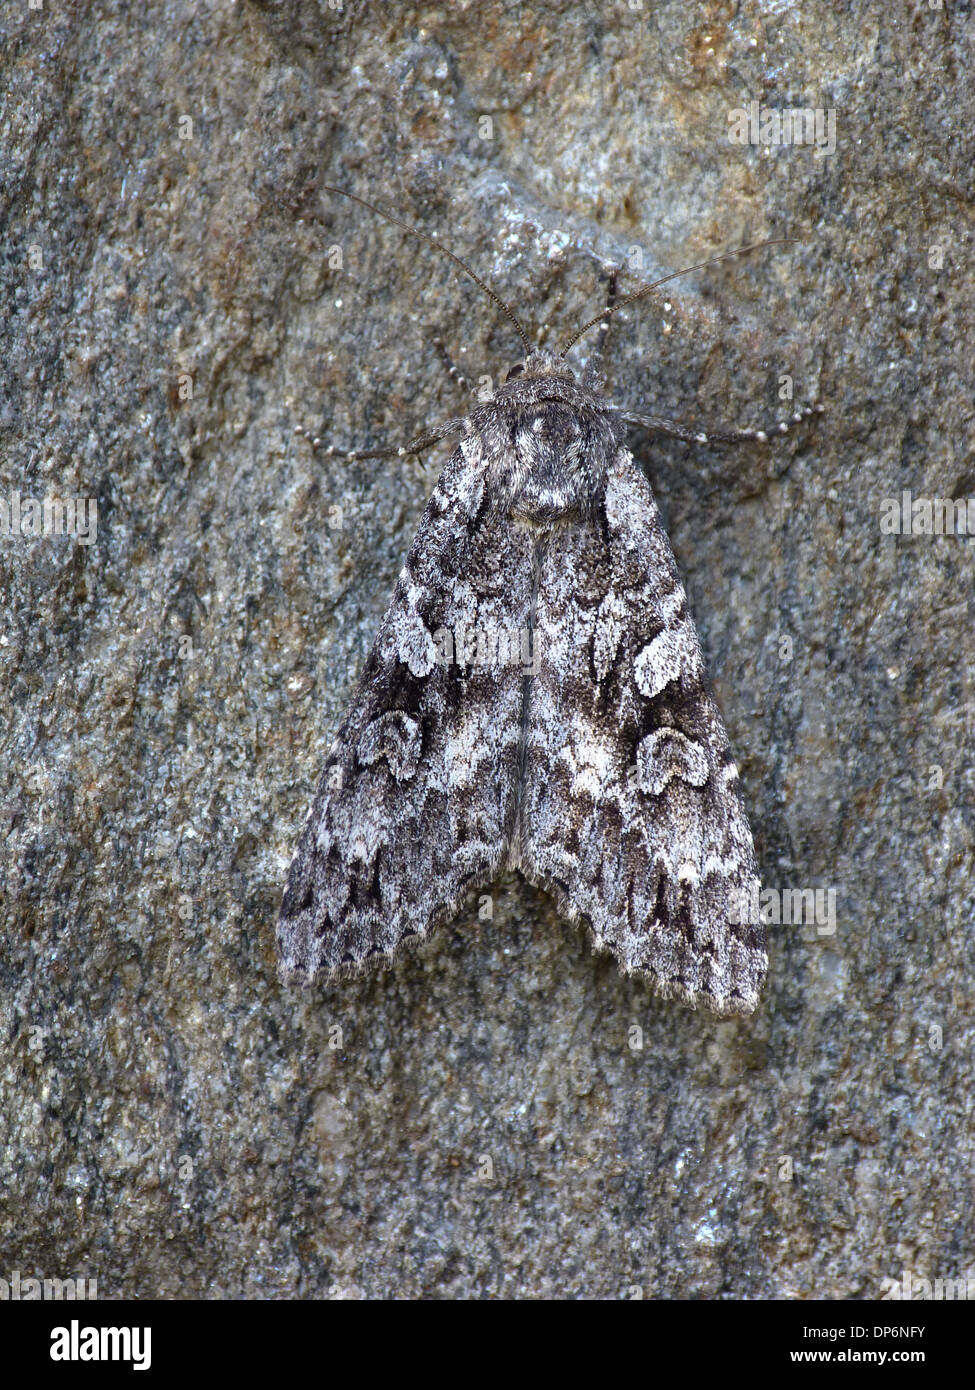 Great Brocade (Eurois occulta) adult, resting on stone, Cannobina Valley, Italian Alps, Piedmont, Northern Italy, July Stock Photo